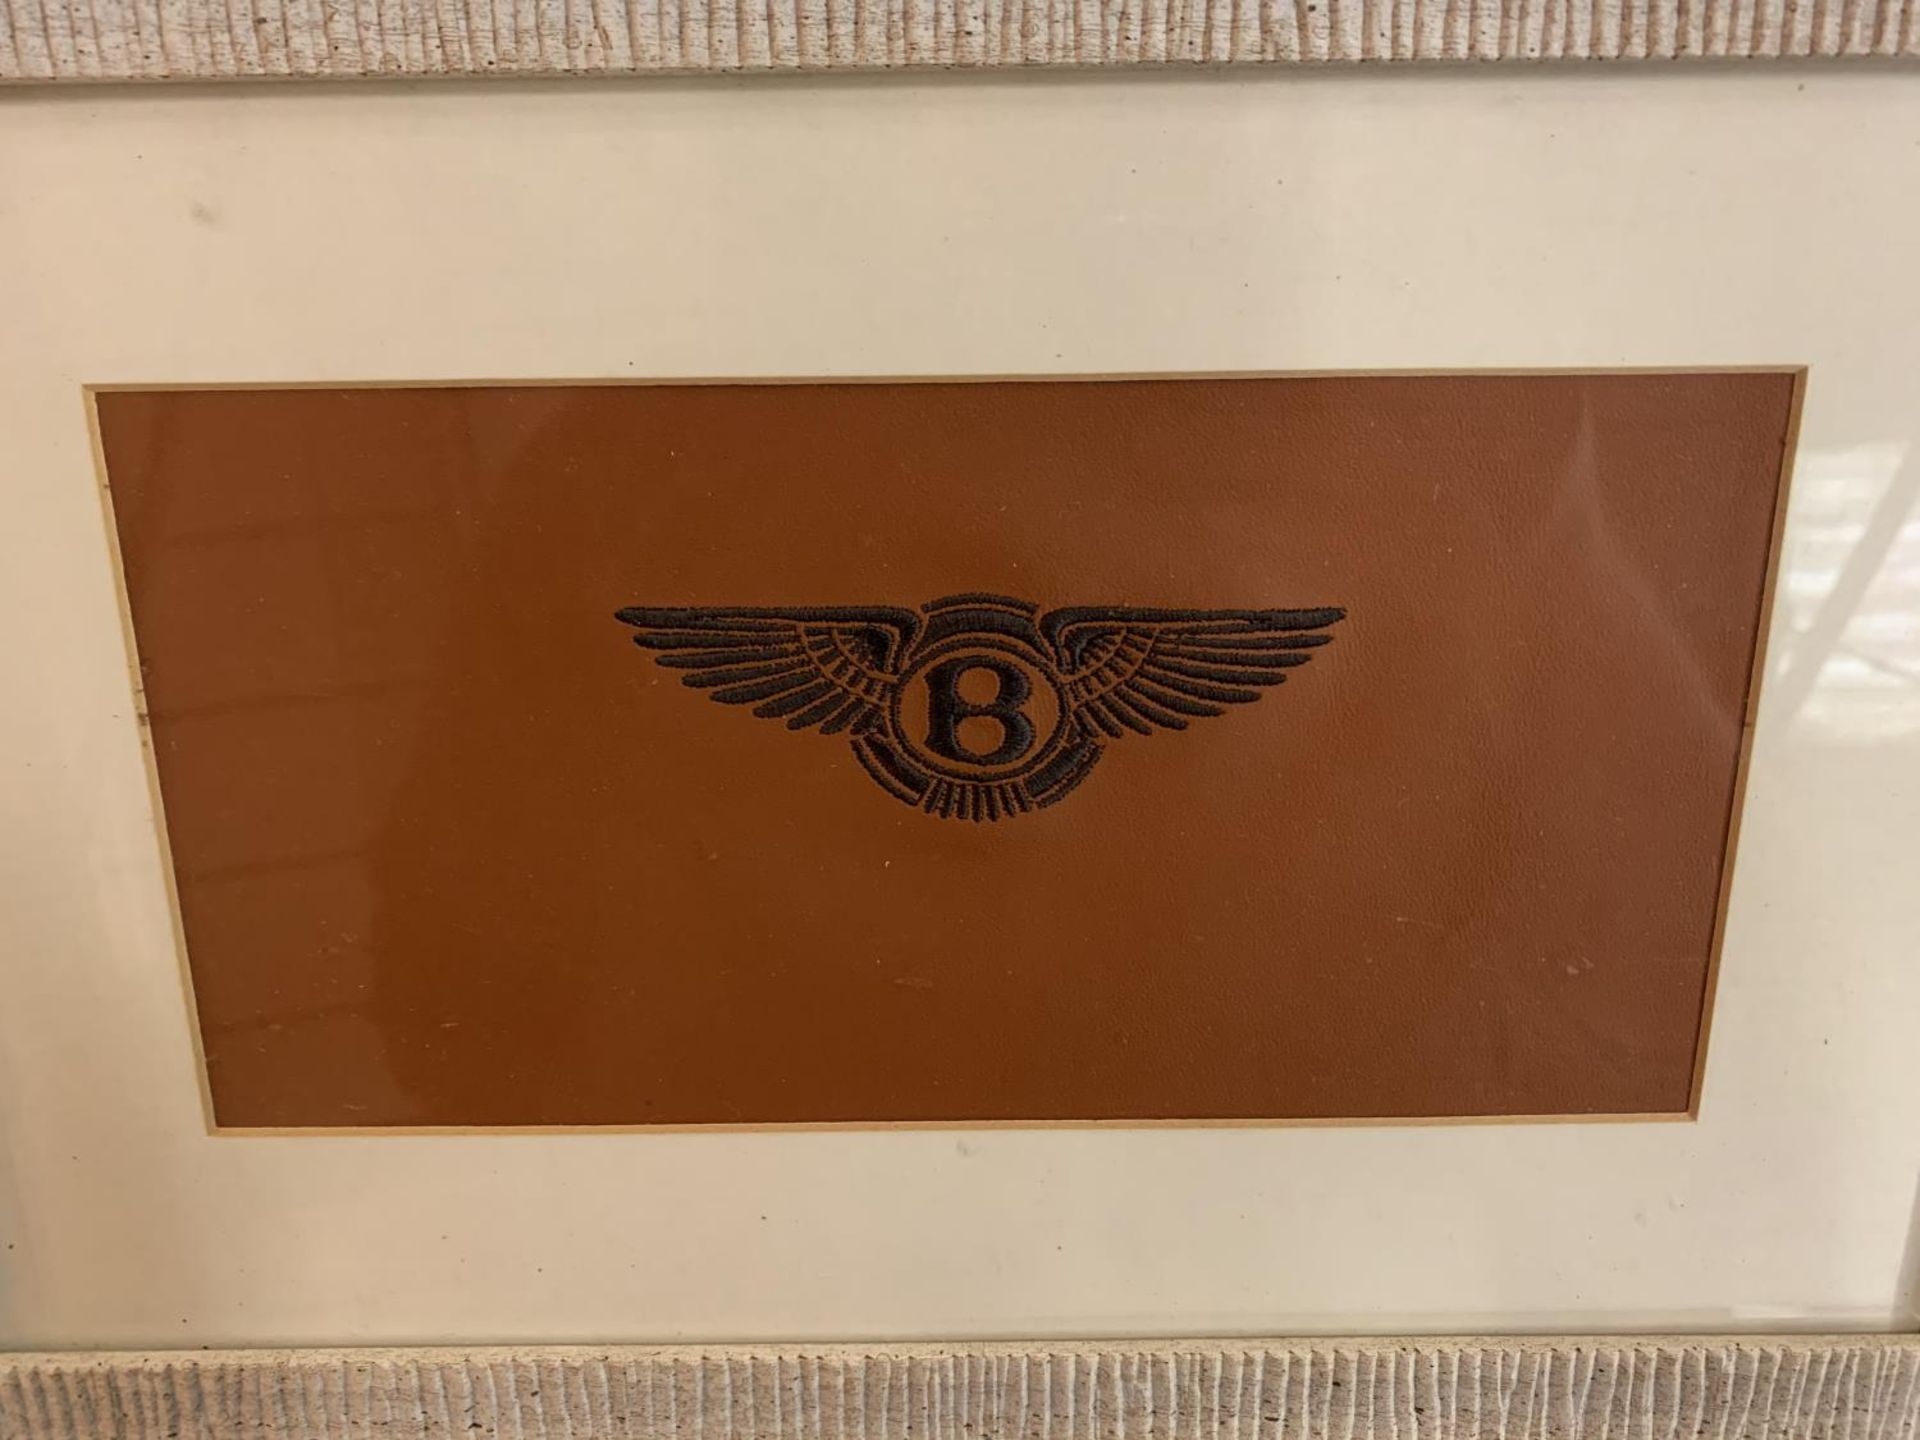 A FRAMED TAN LEATHER WITH EMBROIDERED BENTLEY LOGO - Image 2 of 2